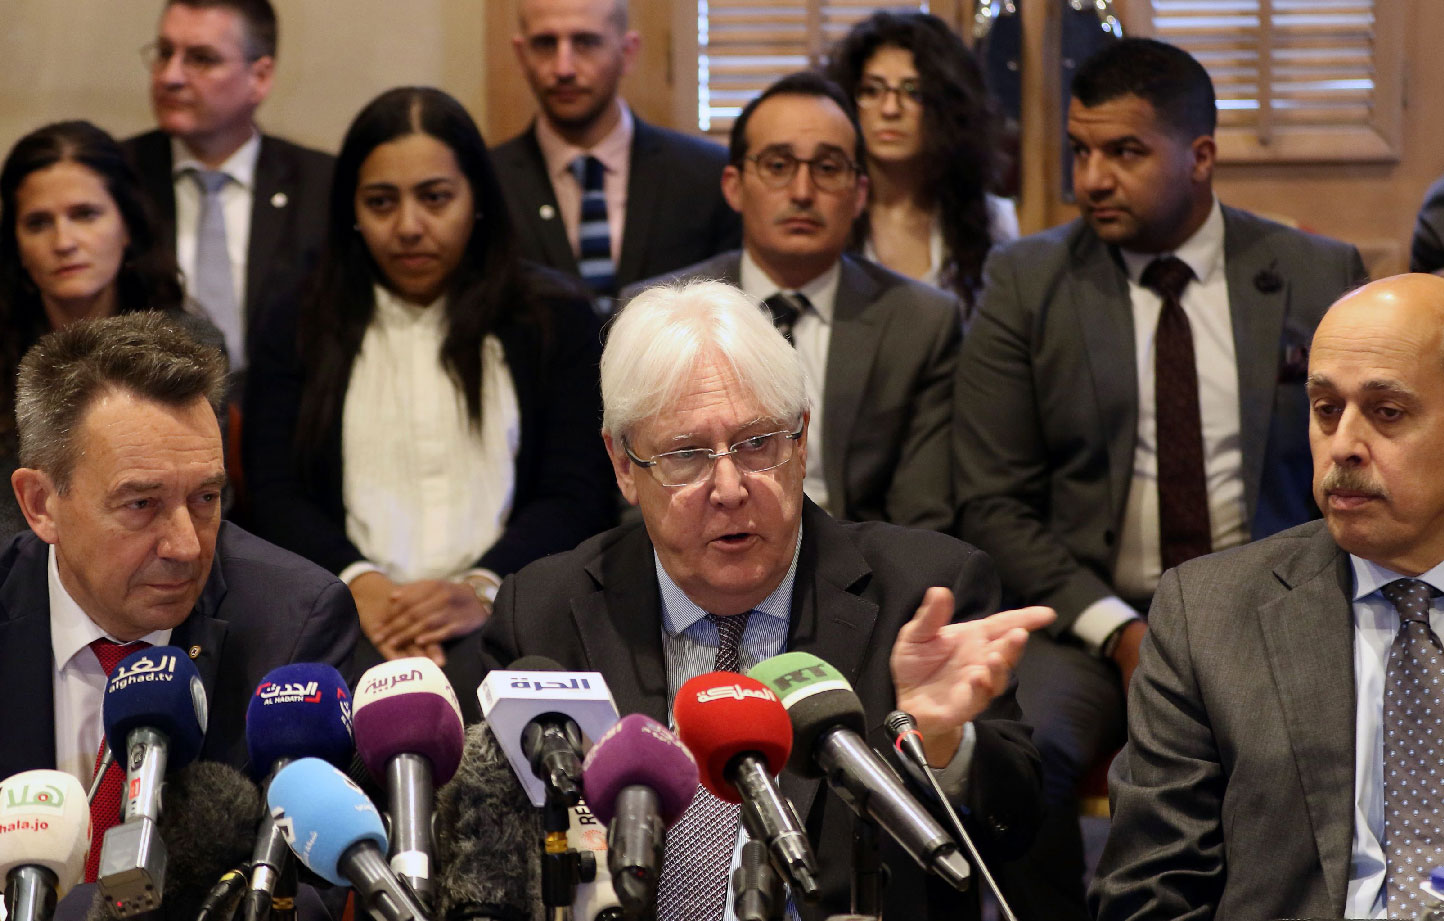 United Nations Special Envoy to Yemen Martin Griffiths (C) and International Committee of the Red Cross President Peter Maurer (L) attend a new round of talks by Yemen's warring parties on prisoners swap on February 5, 2019 in Amman.